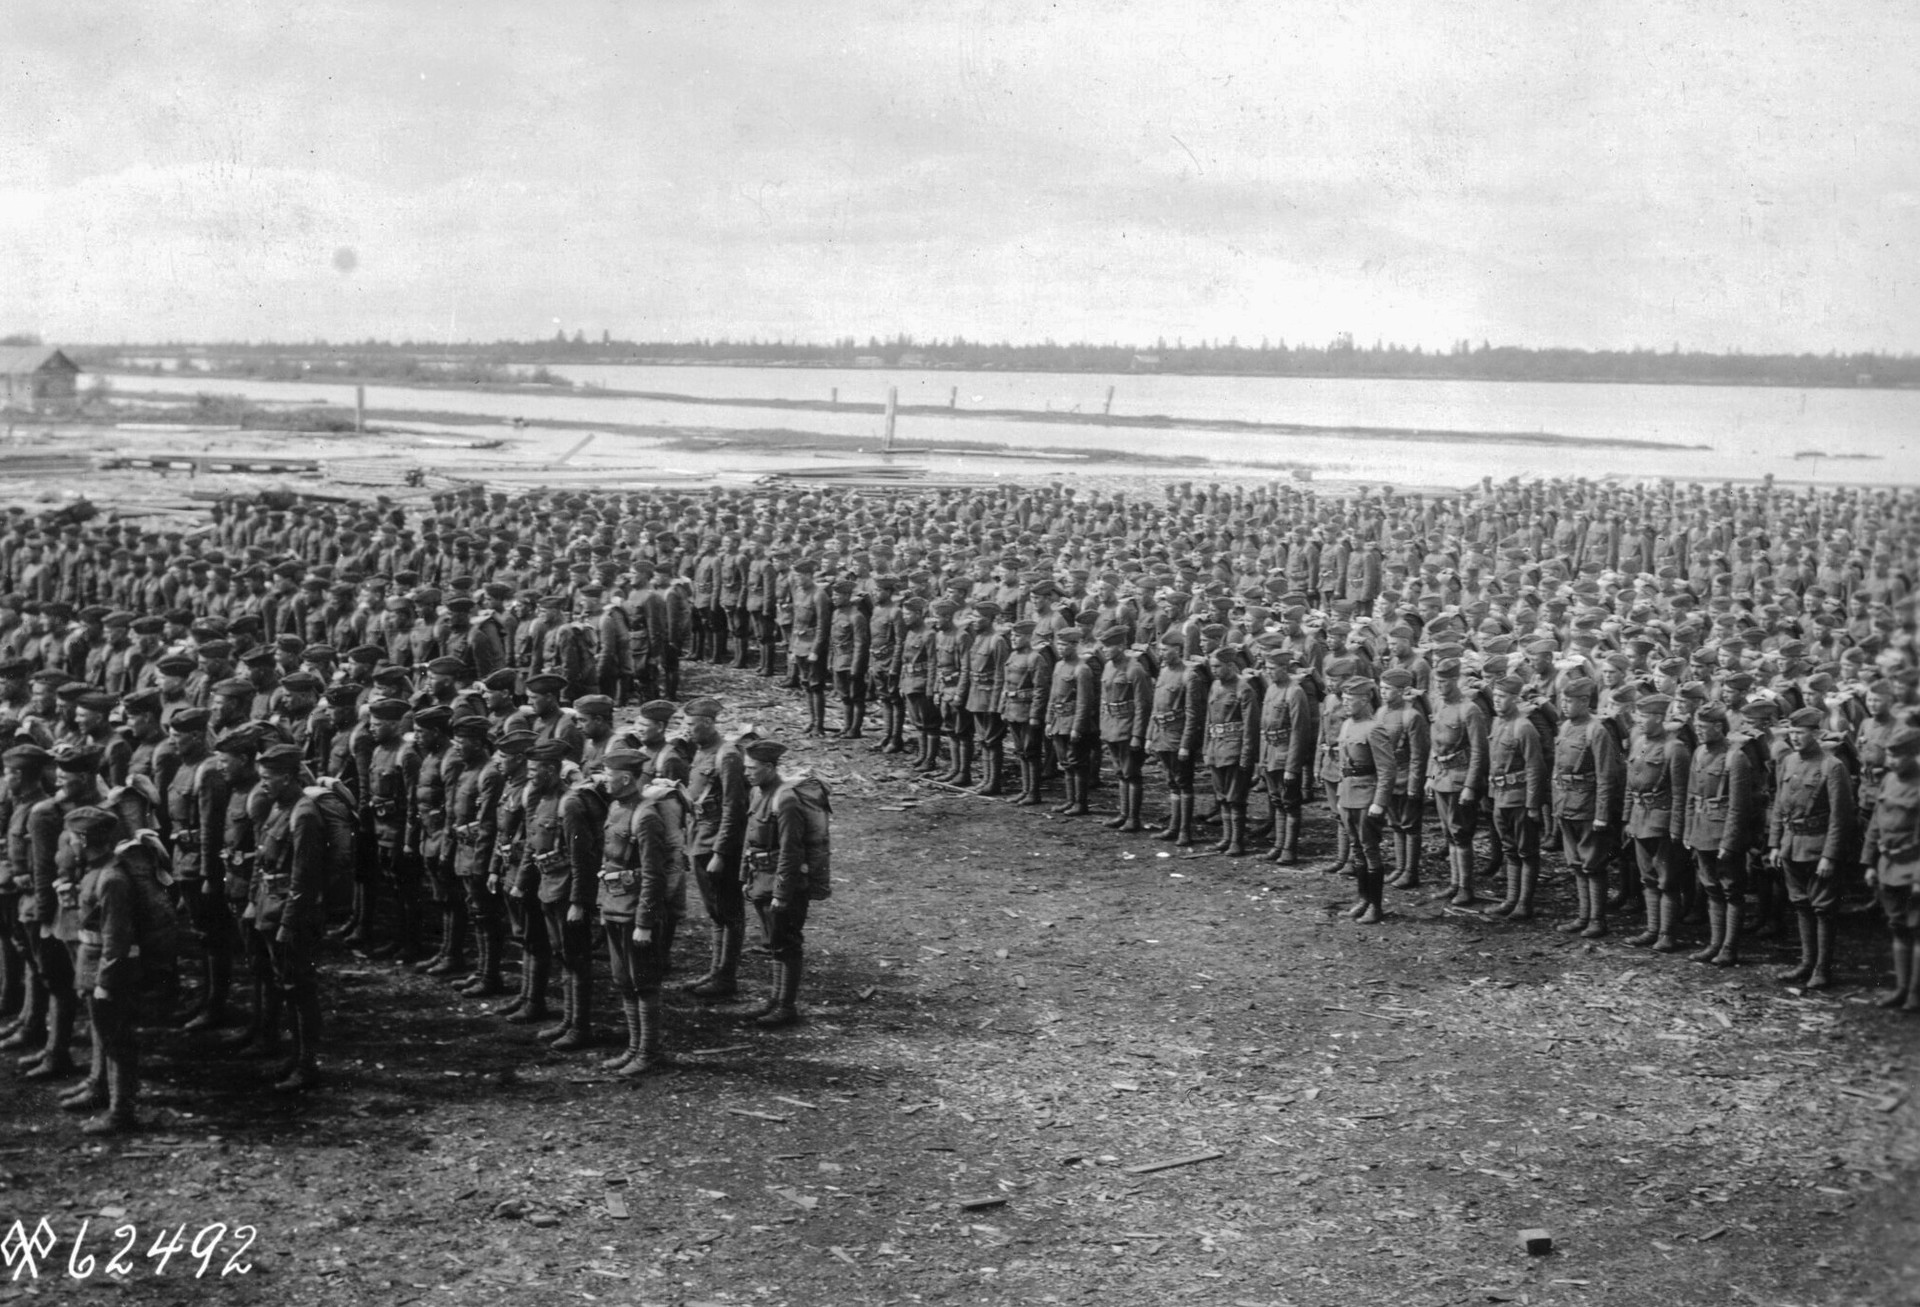 U.S. troops line up for inspection before leaving Russia in June 1919.